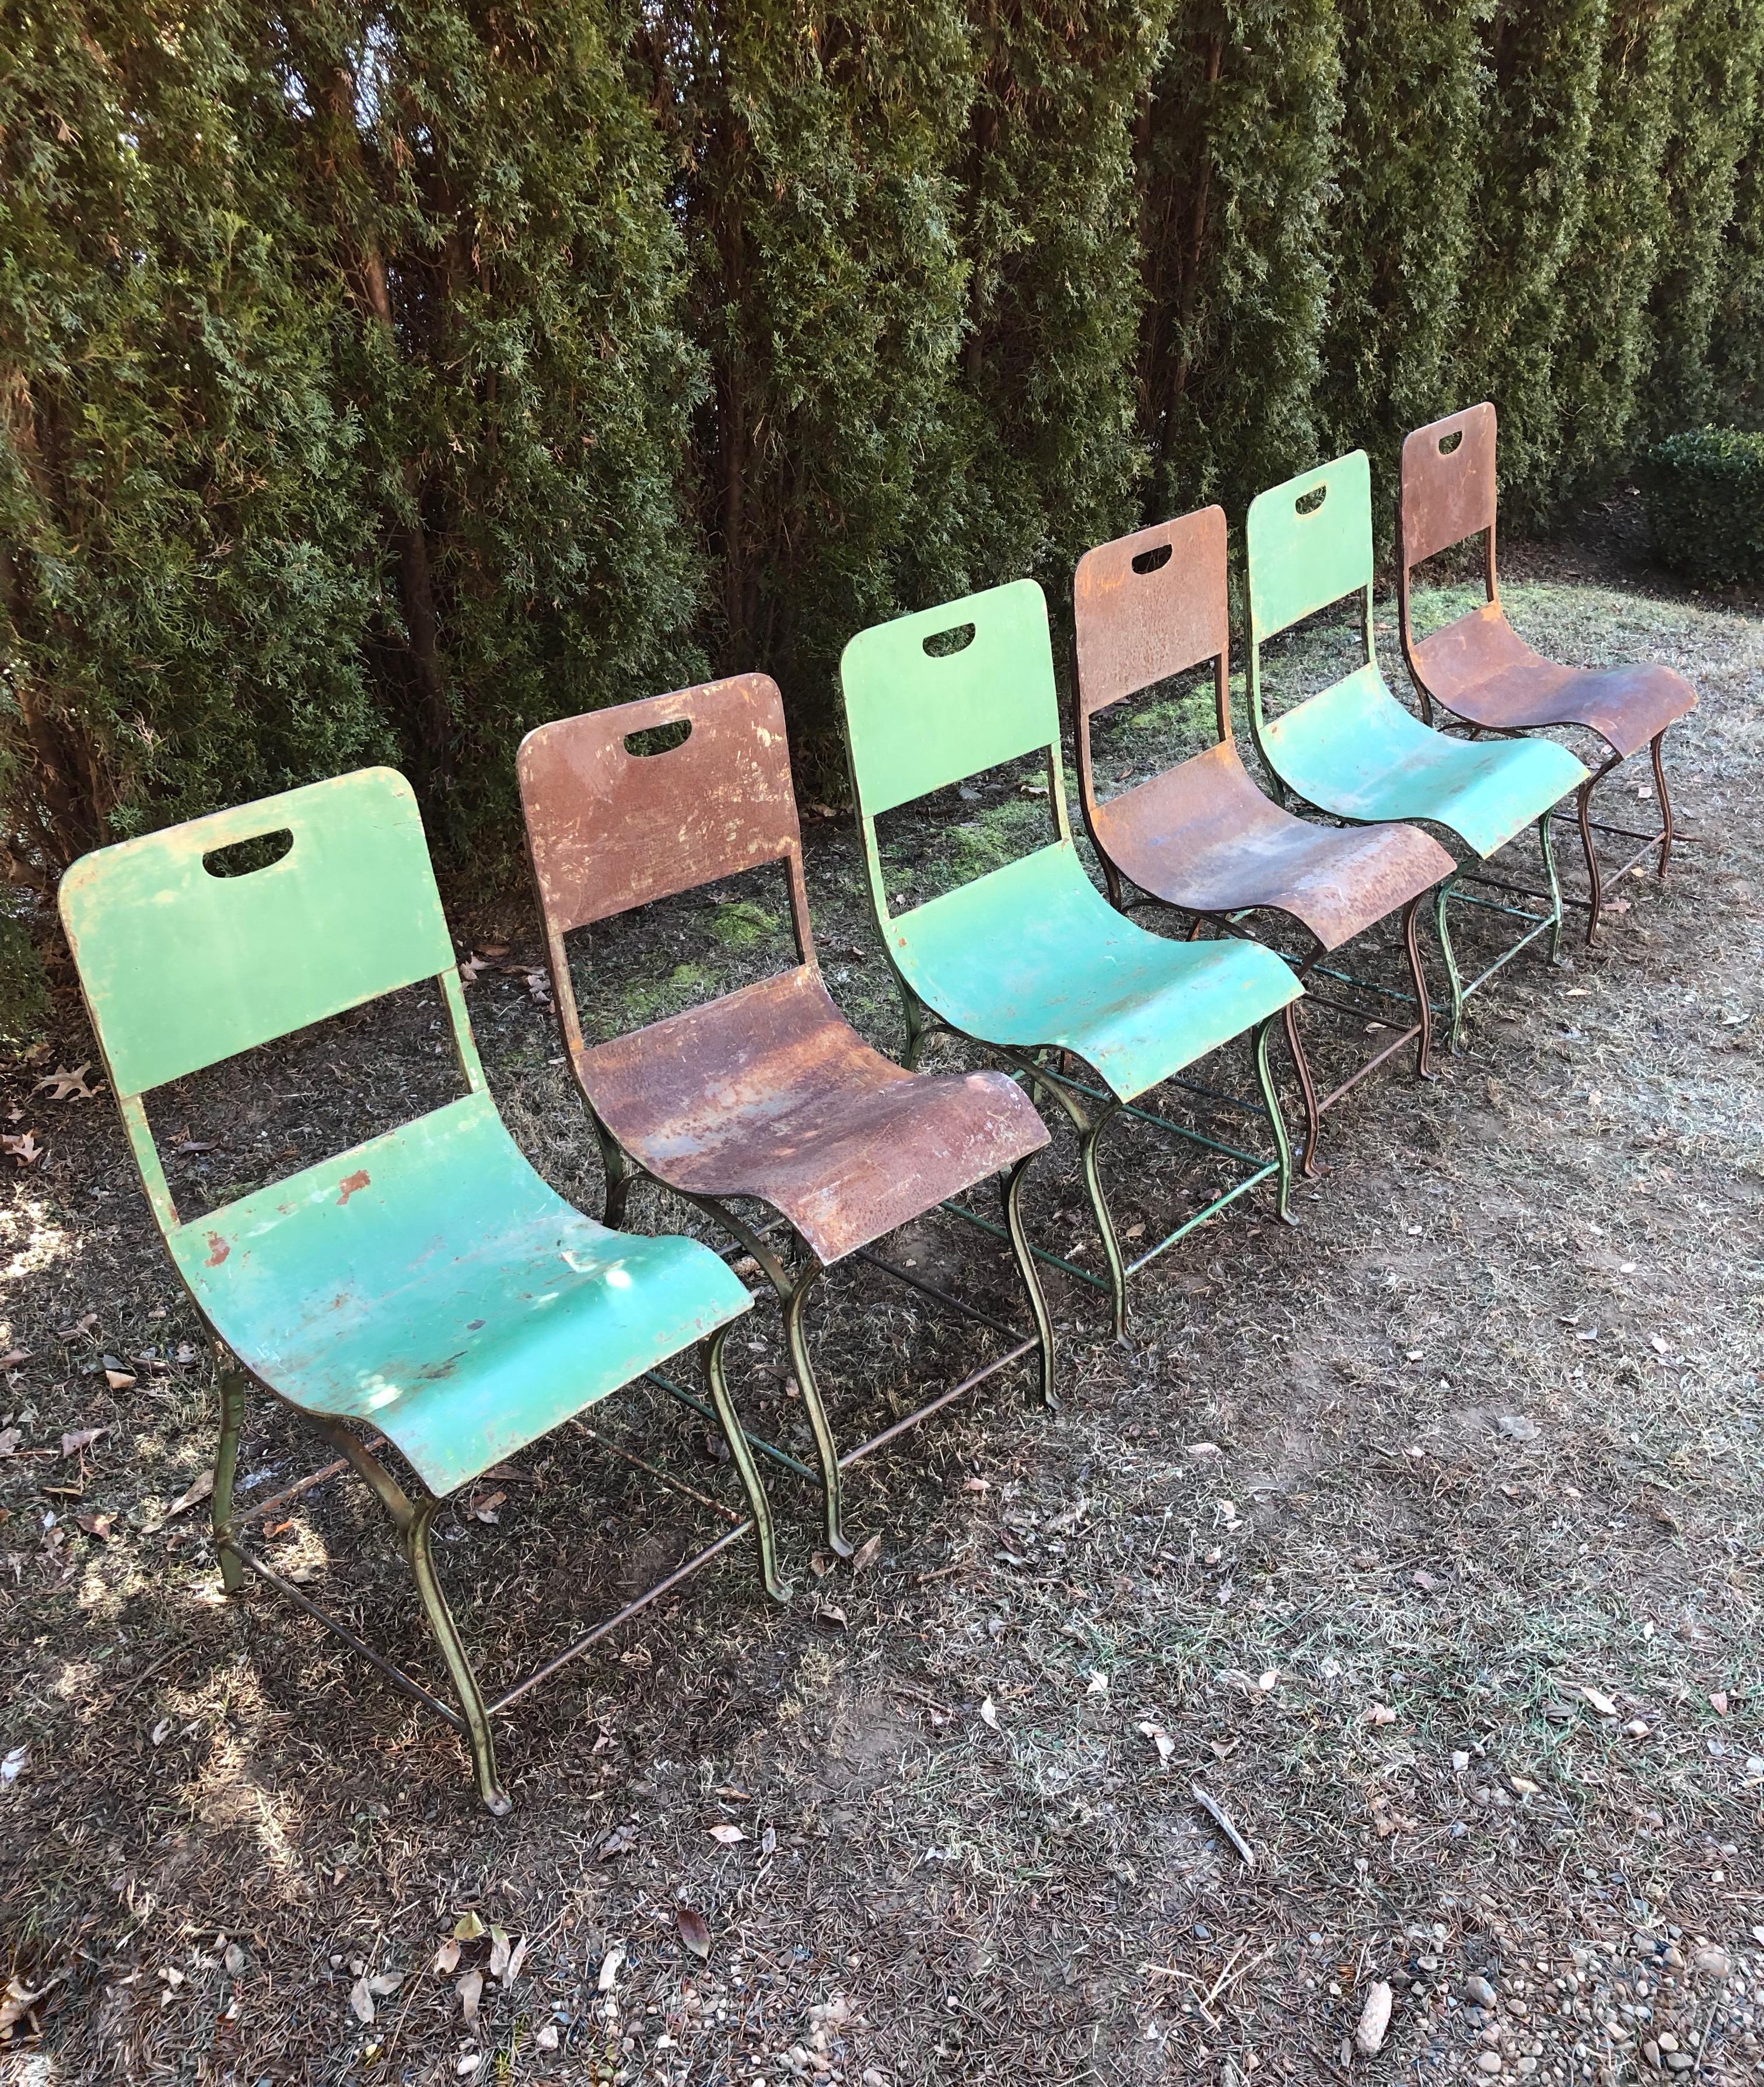 We bought this set of chairs because they are the most comfortable garden chairs you have ever sat in and a near match to 12 others we presently have in stock (FCH 1022 A, B and C). These, however, have rounded-off corners to the backs, so not a